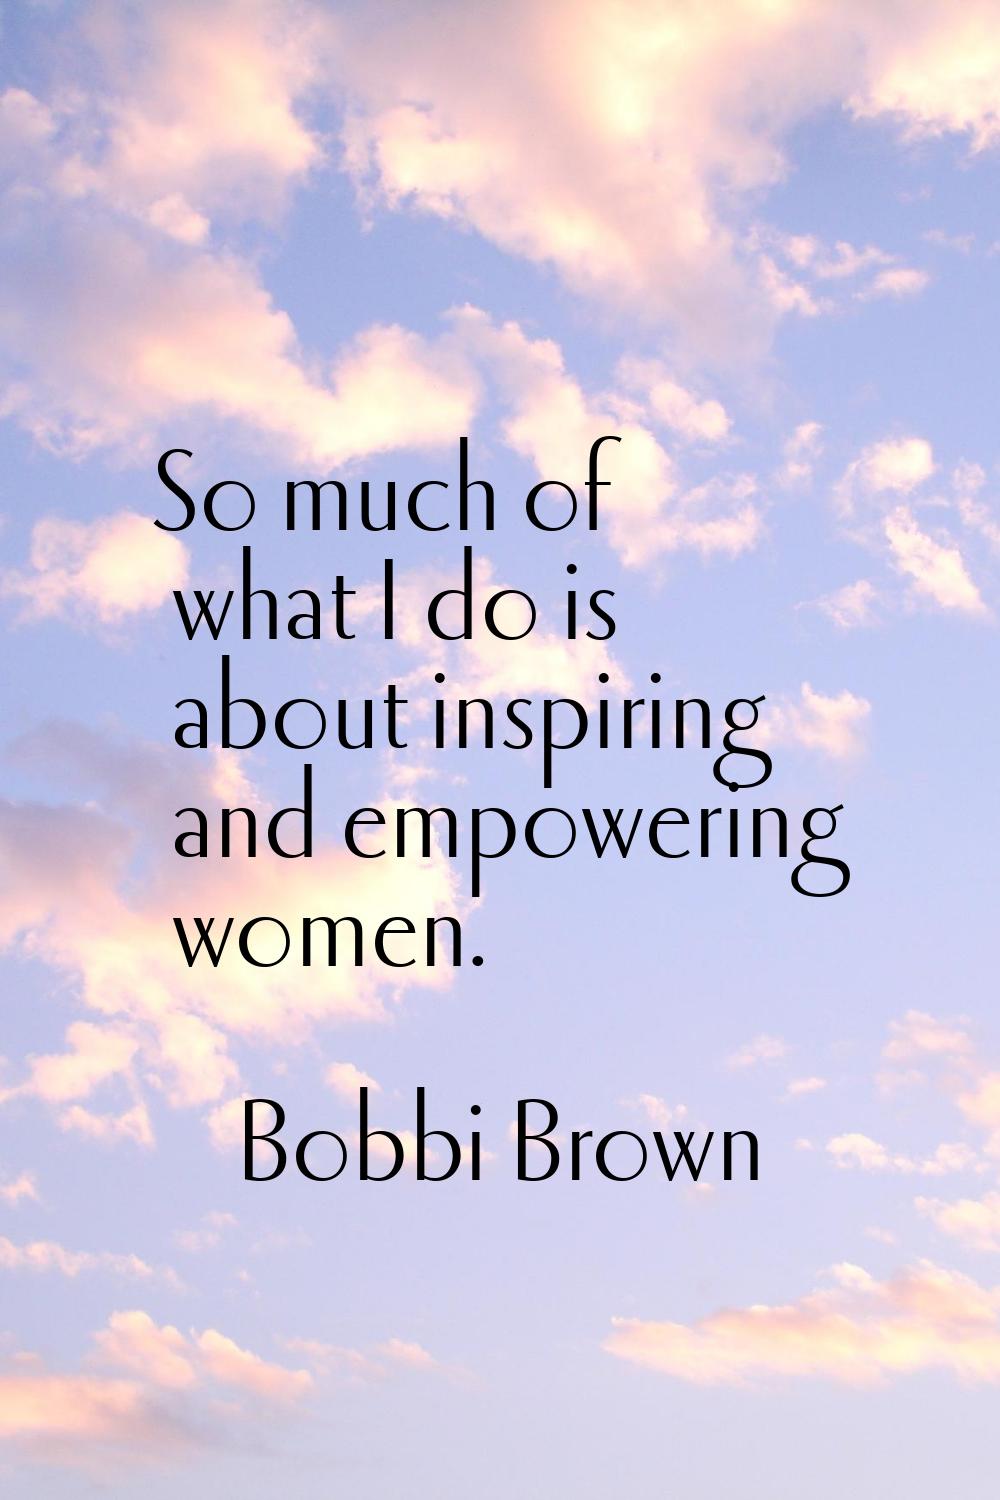 So much of what I do is about inspiring and empowering women.